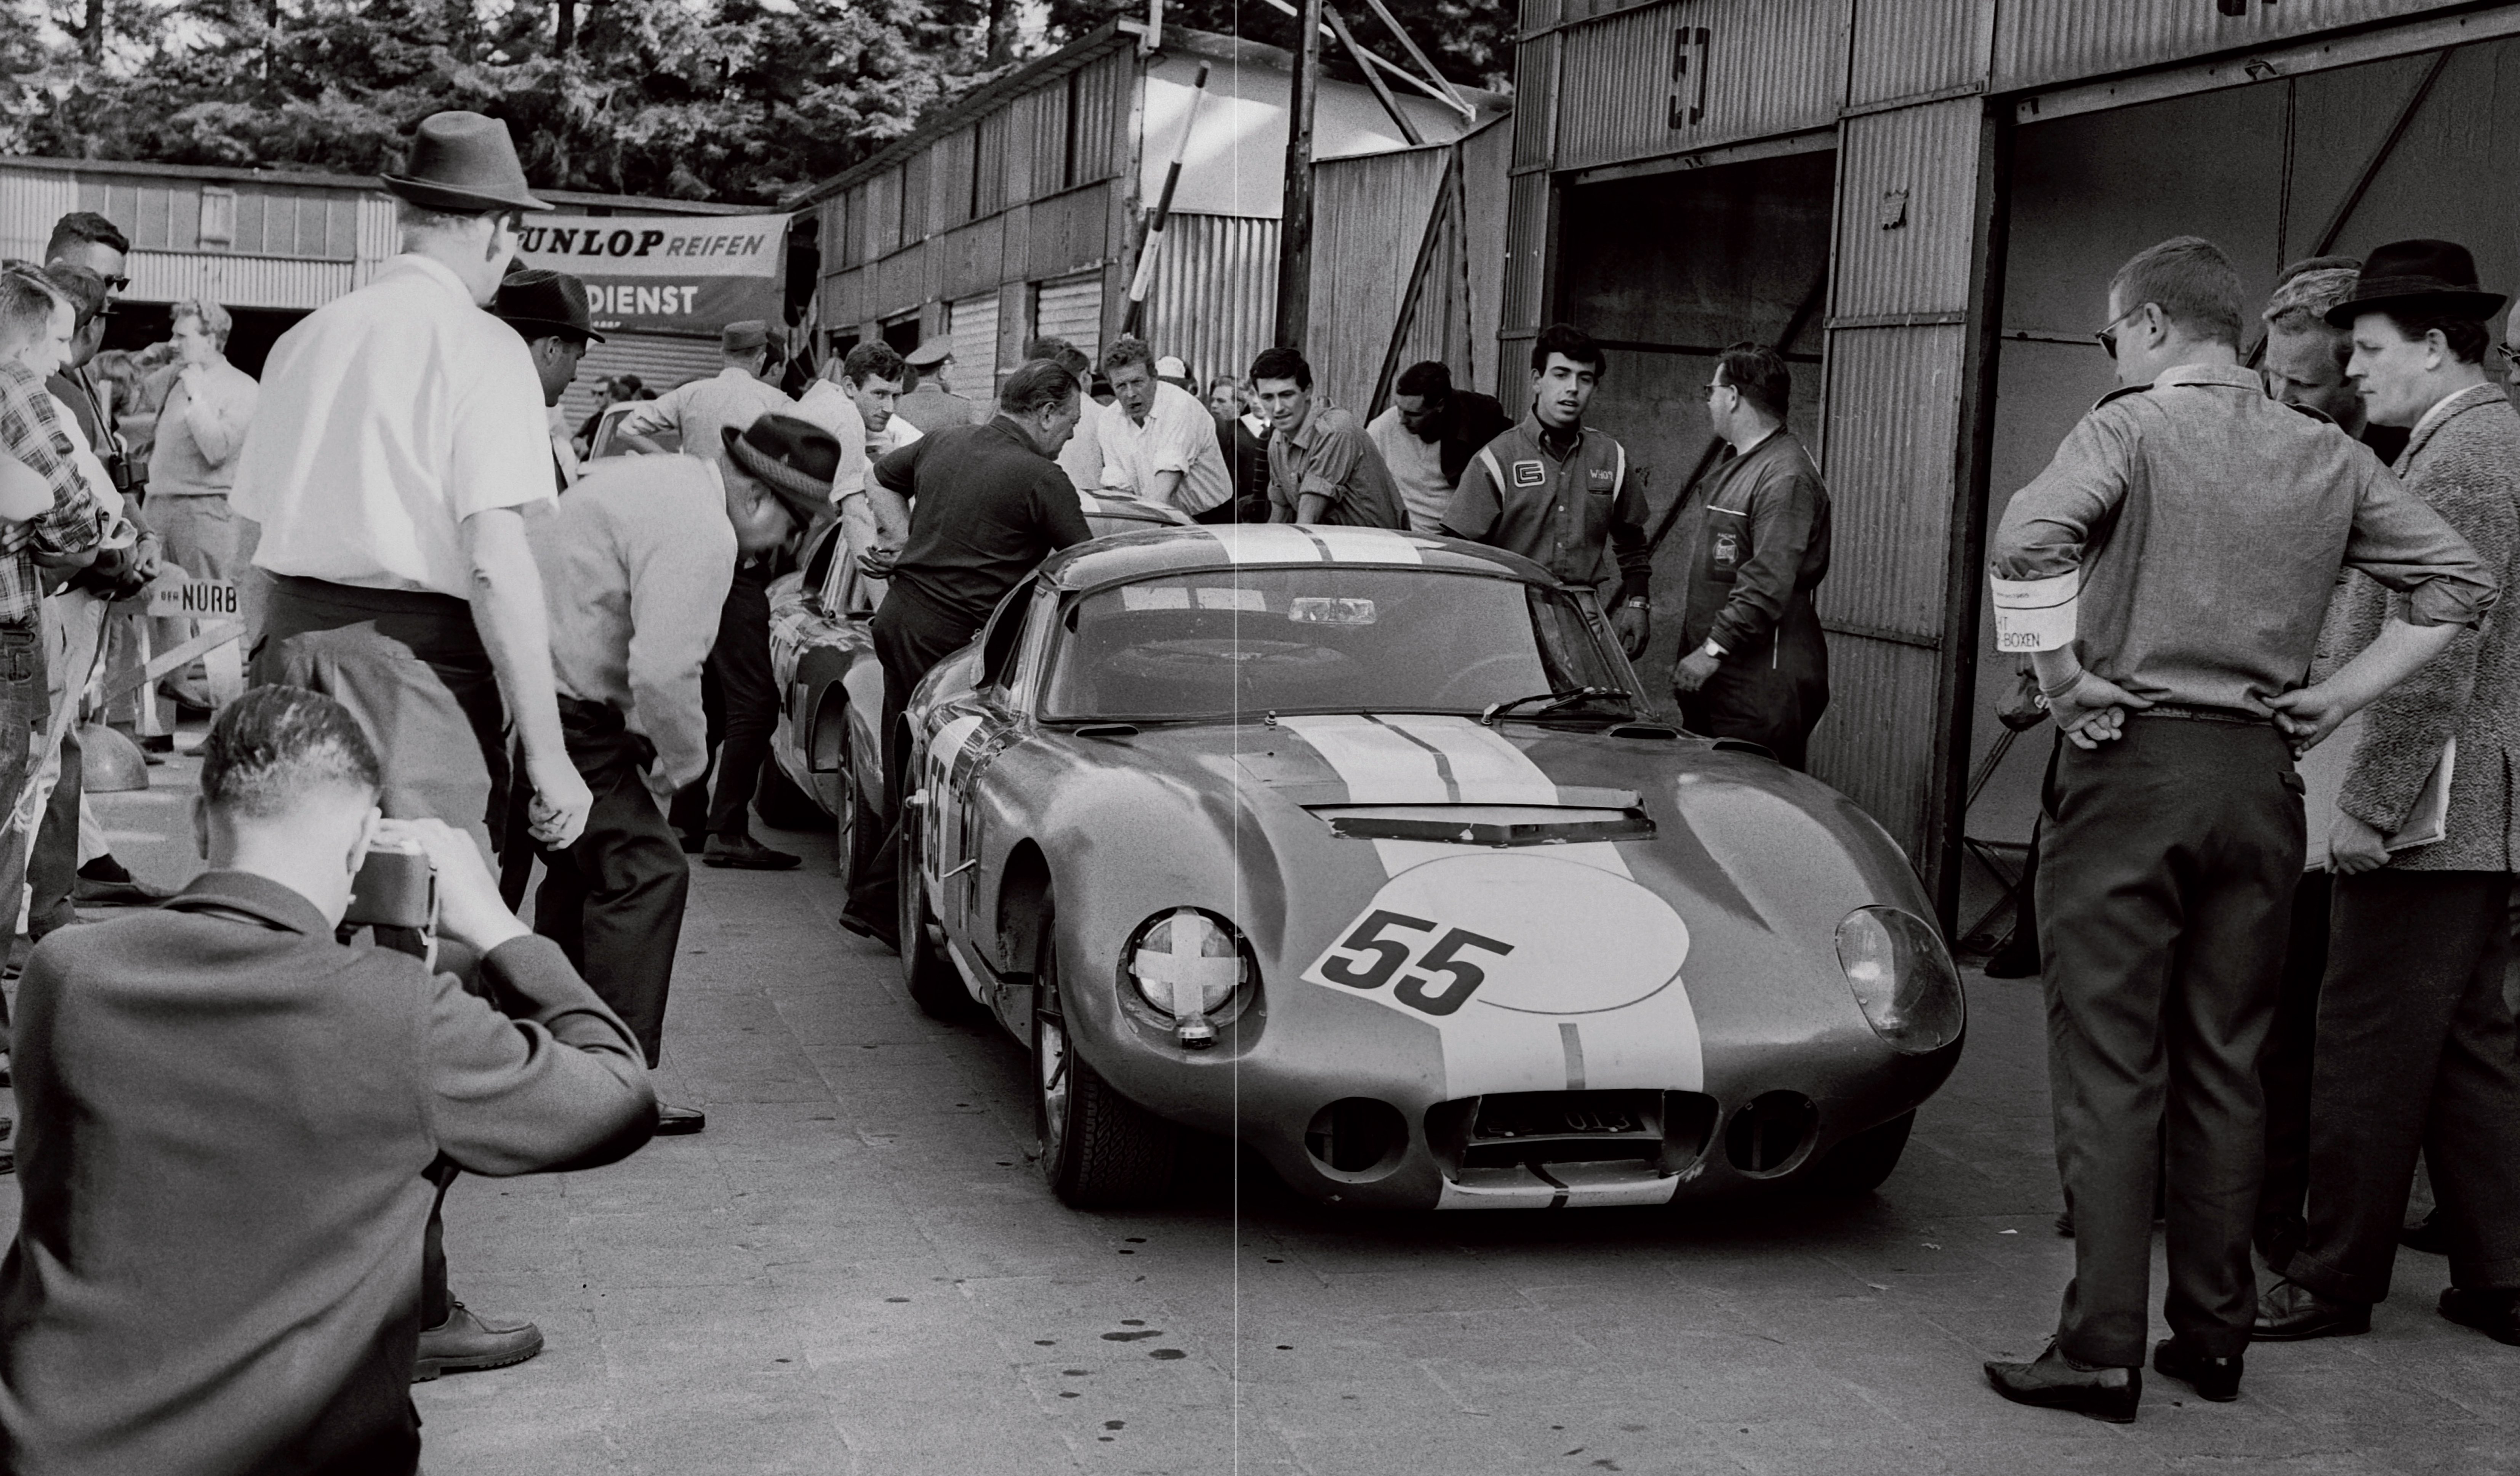 Black and white action photograph of a sports car on a sloped track with spectators on the side of the road with Johnny Rives Manou Zurini Editions Cercle D'Art Car Racing 1965 in white and beige